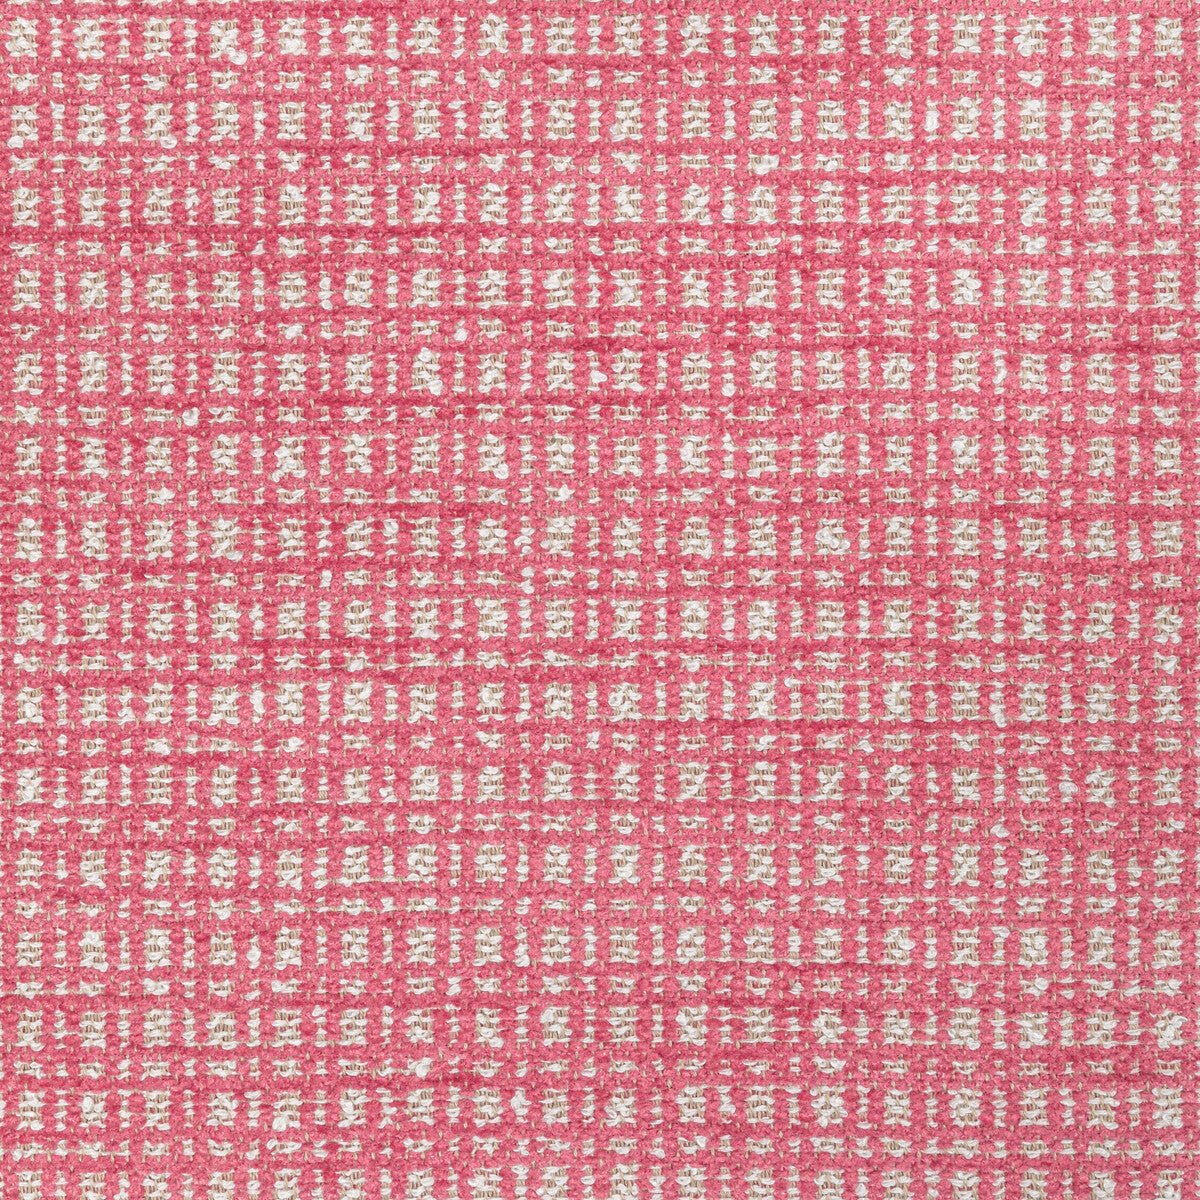 Landiers Texture fabric in pink color - pattern 8022123.7.0 - by Brunschwig &amp; Fils in the Chambery Textures III collection